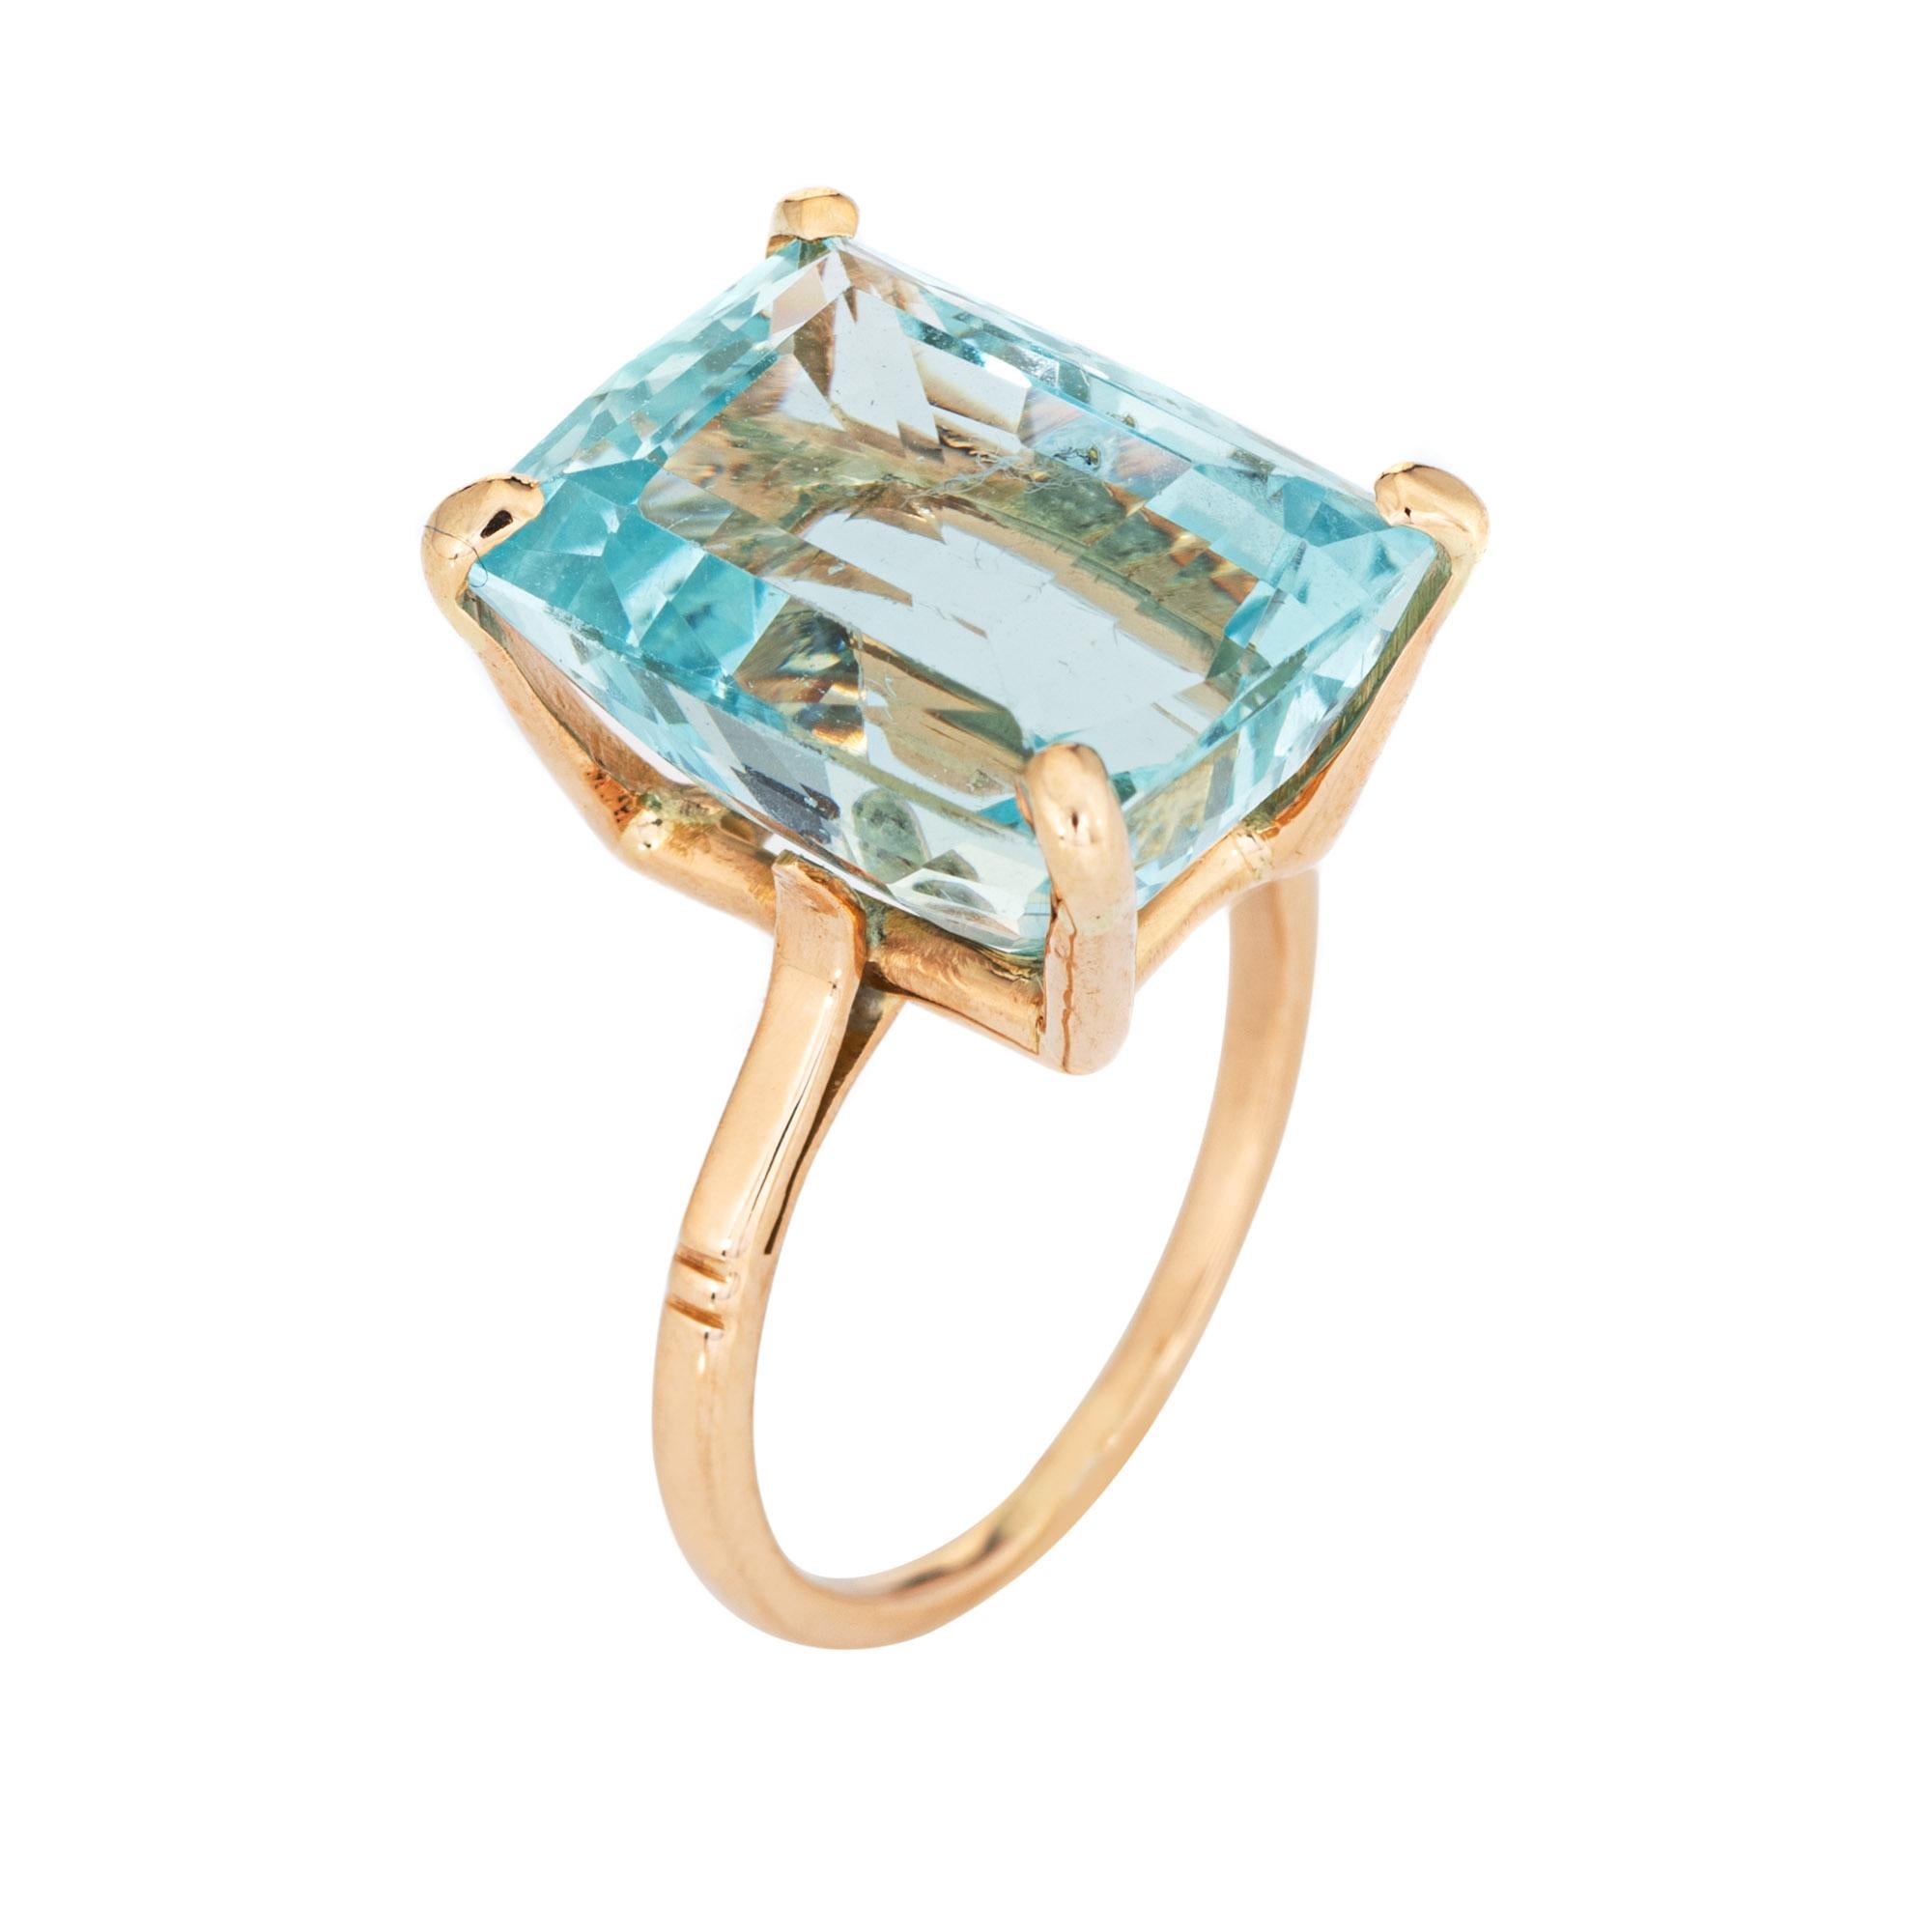 Stylish vintage aquamarine cocktail ring (circa 1960s to 1970s) crafted in 18 karat yellow gold with platinum accents. 

Emerald cut aquamarine measures 15.5mm x 11.5mm (estimated at 11.50 carats). The aquamarine is in very good condition and free